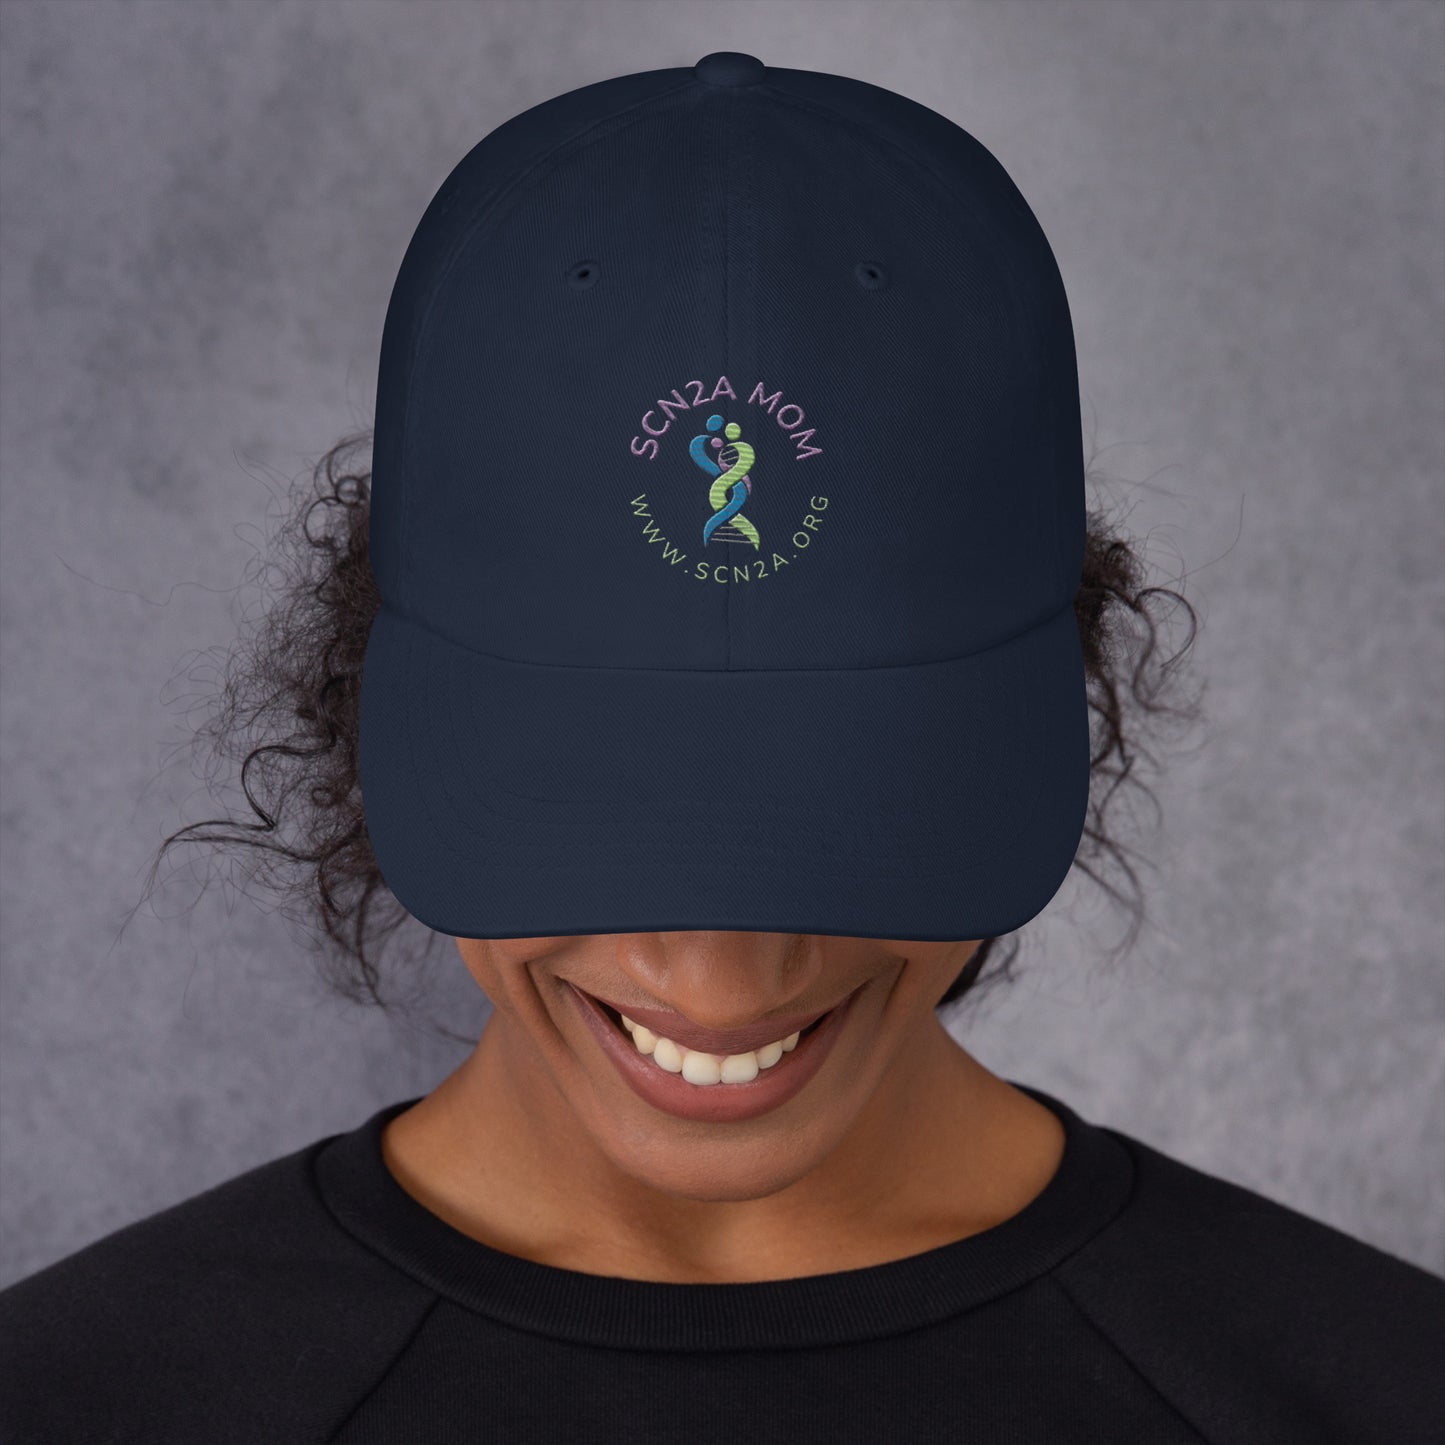 SCN2A Mom Hat